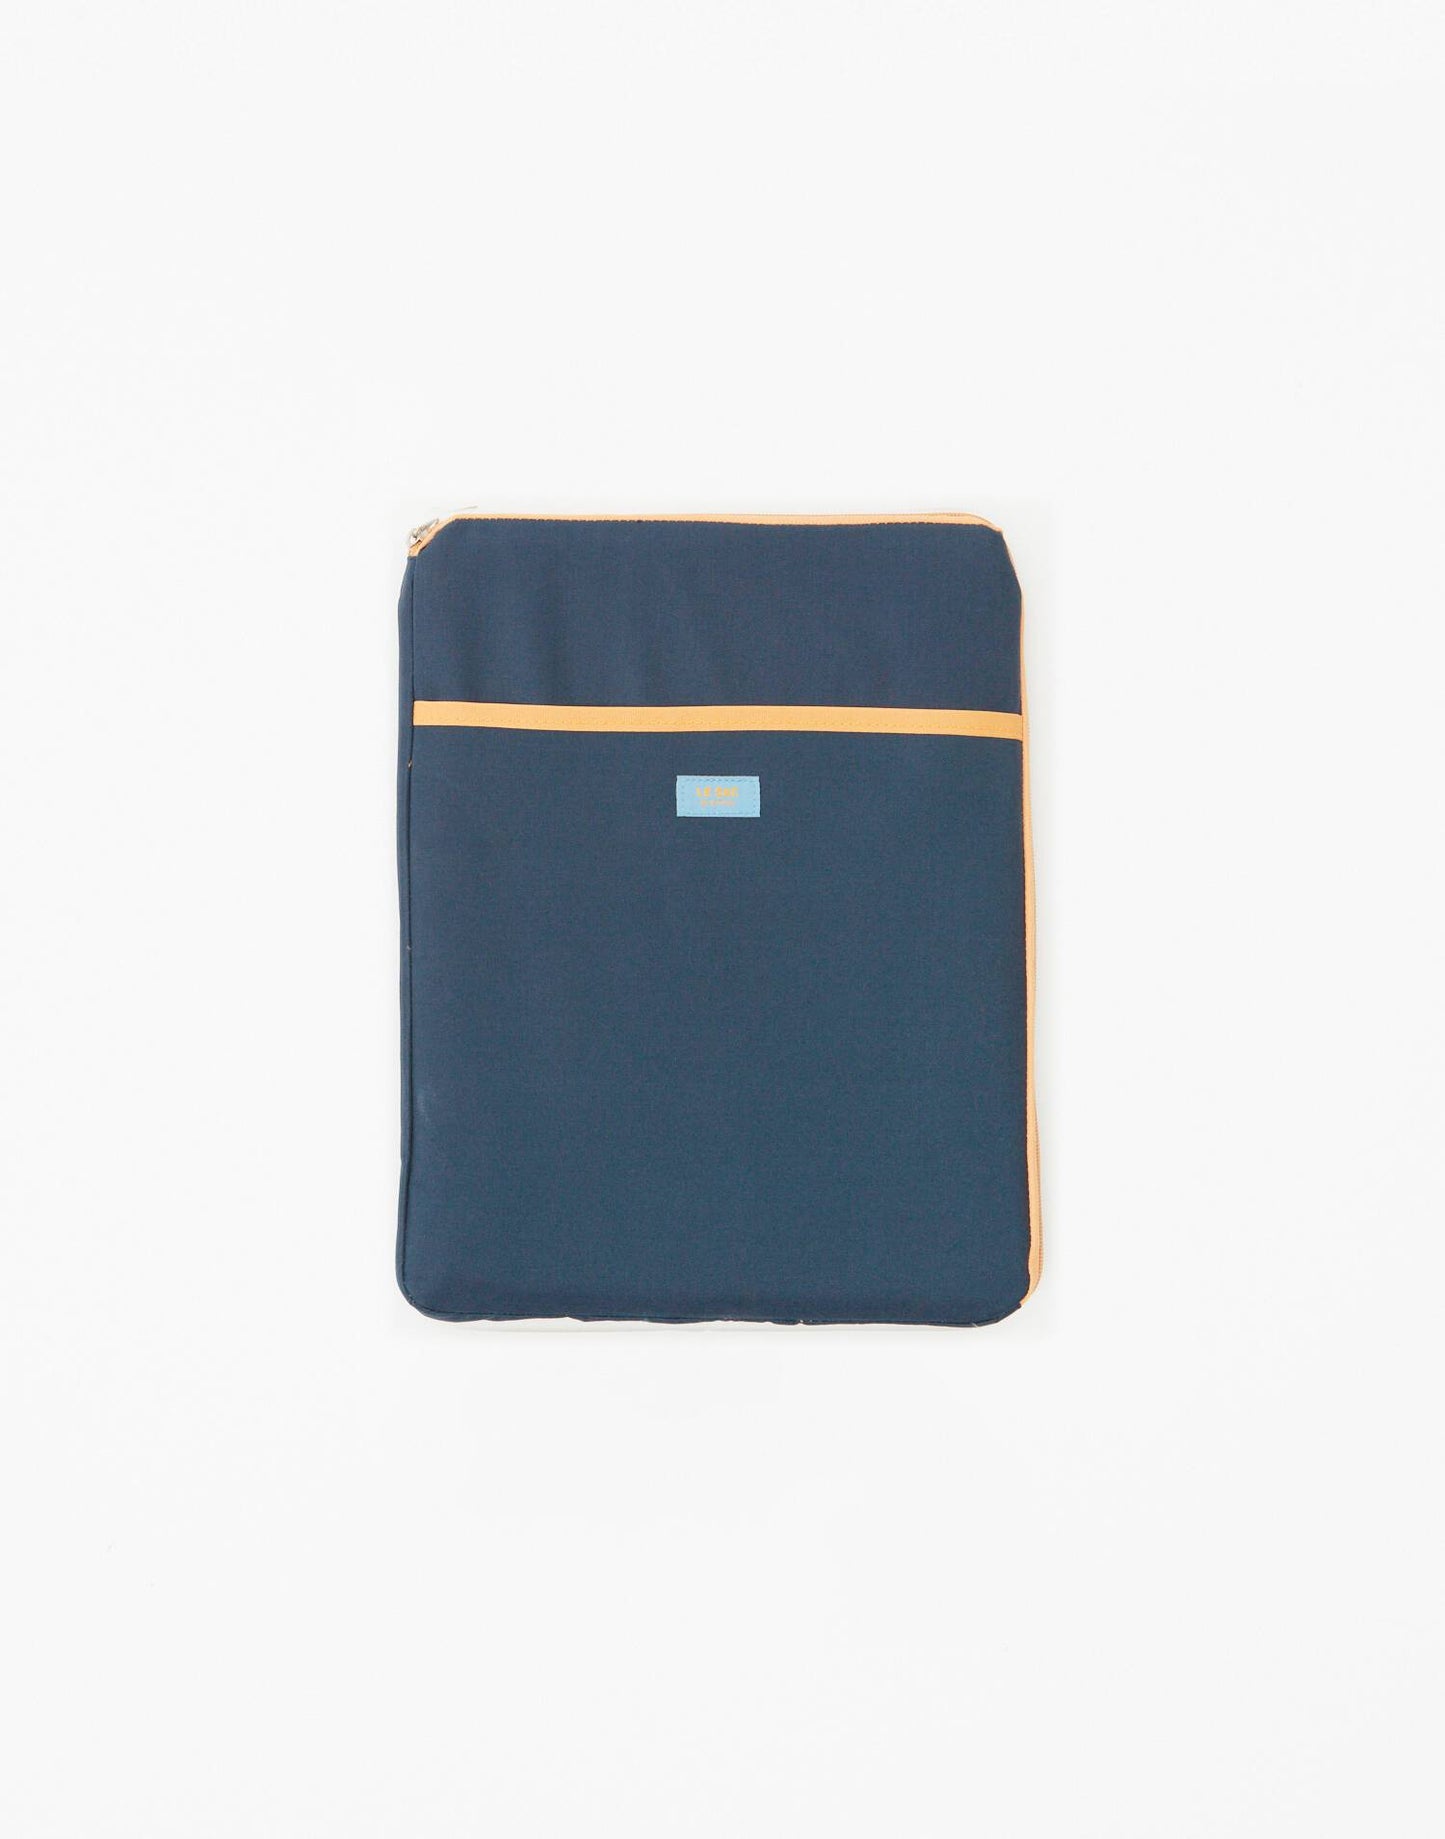 15-inch laptop cover